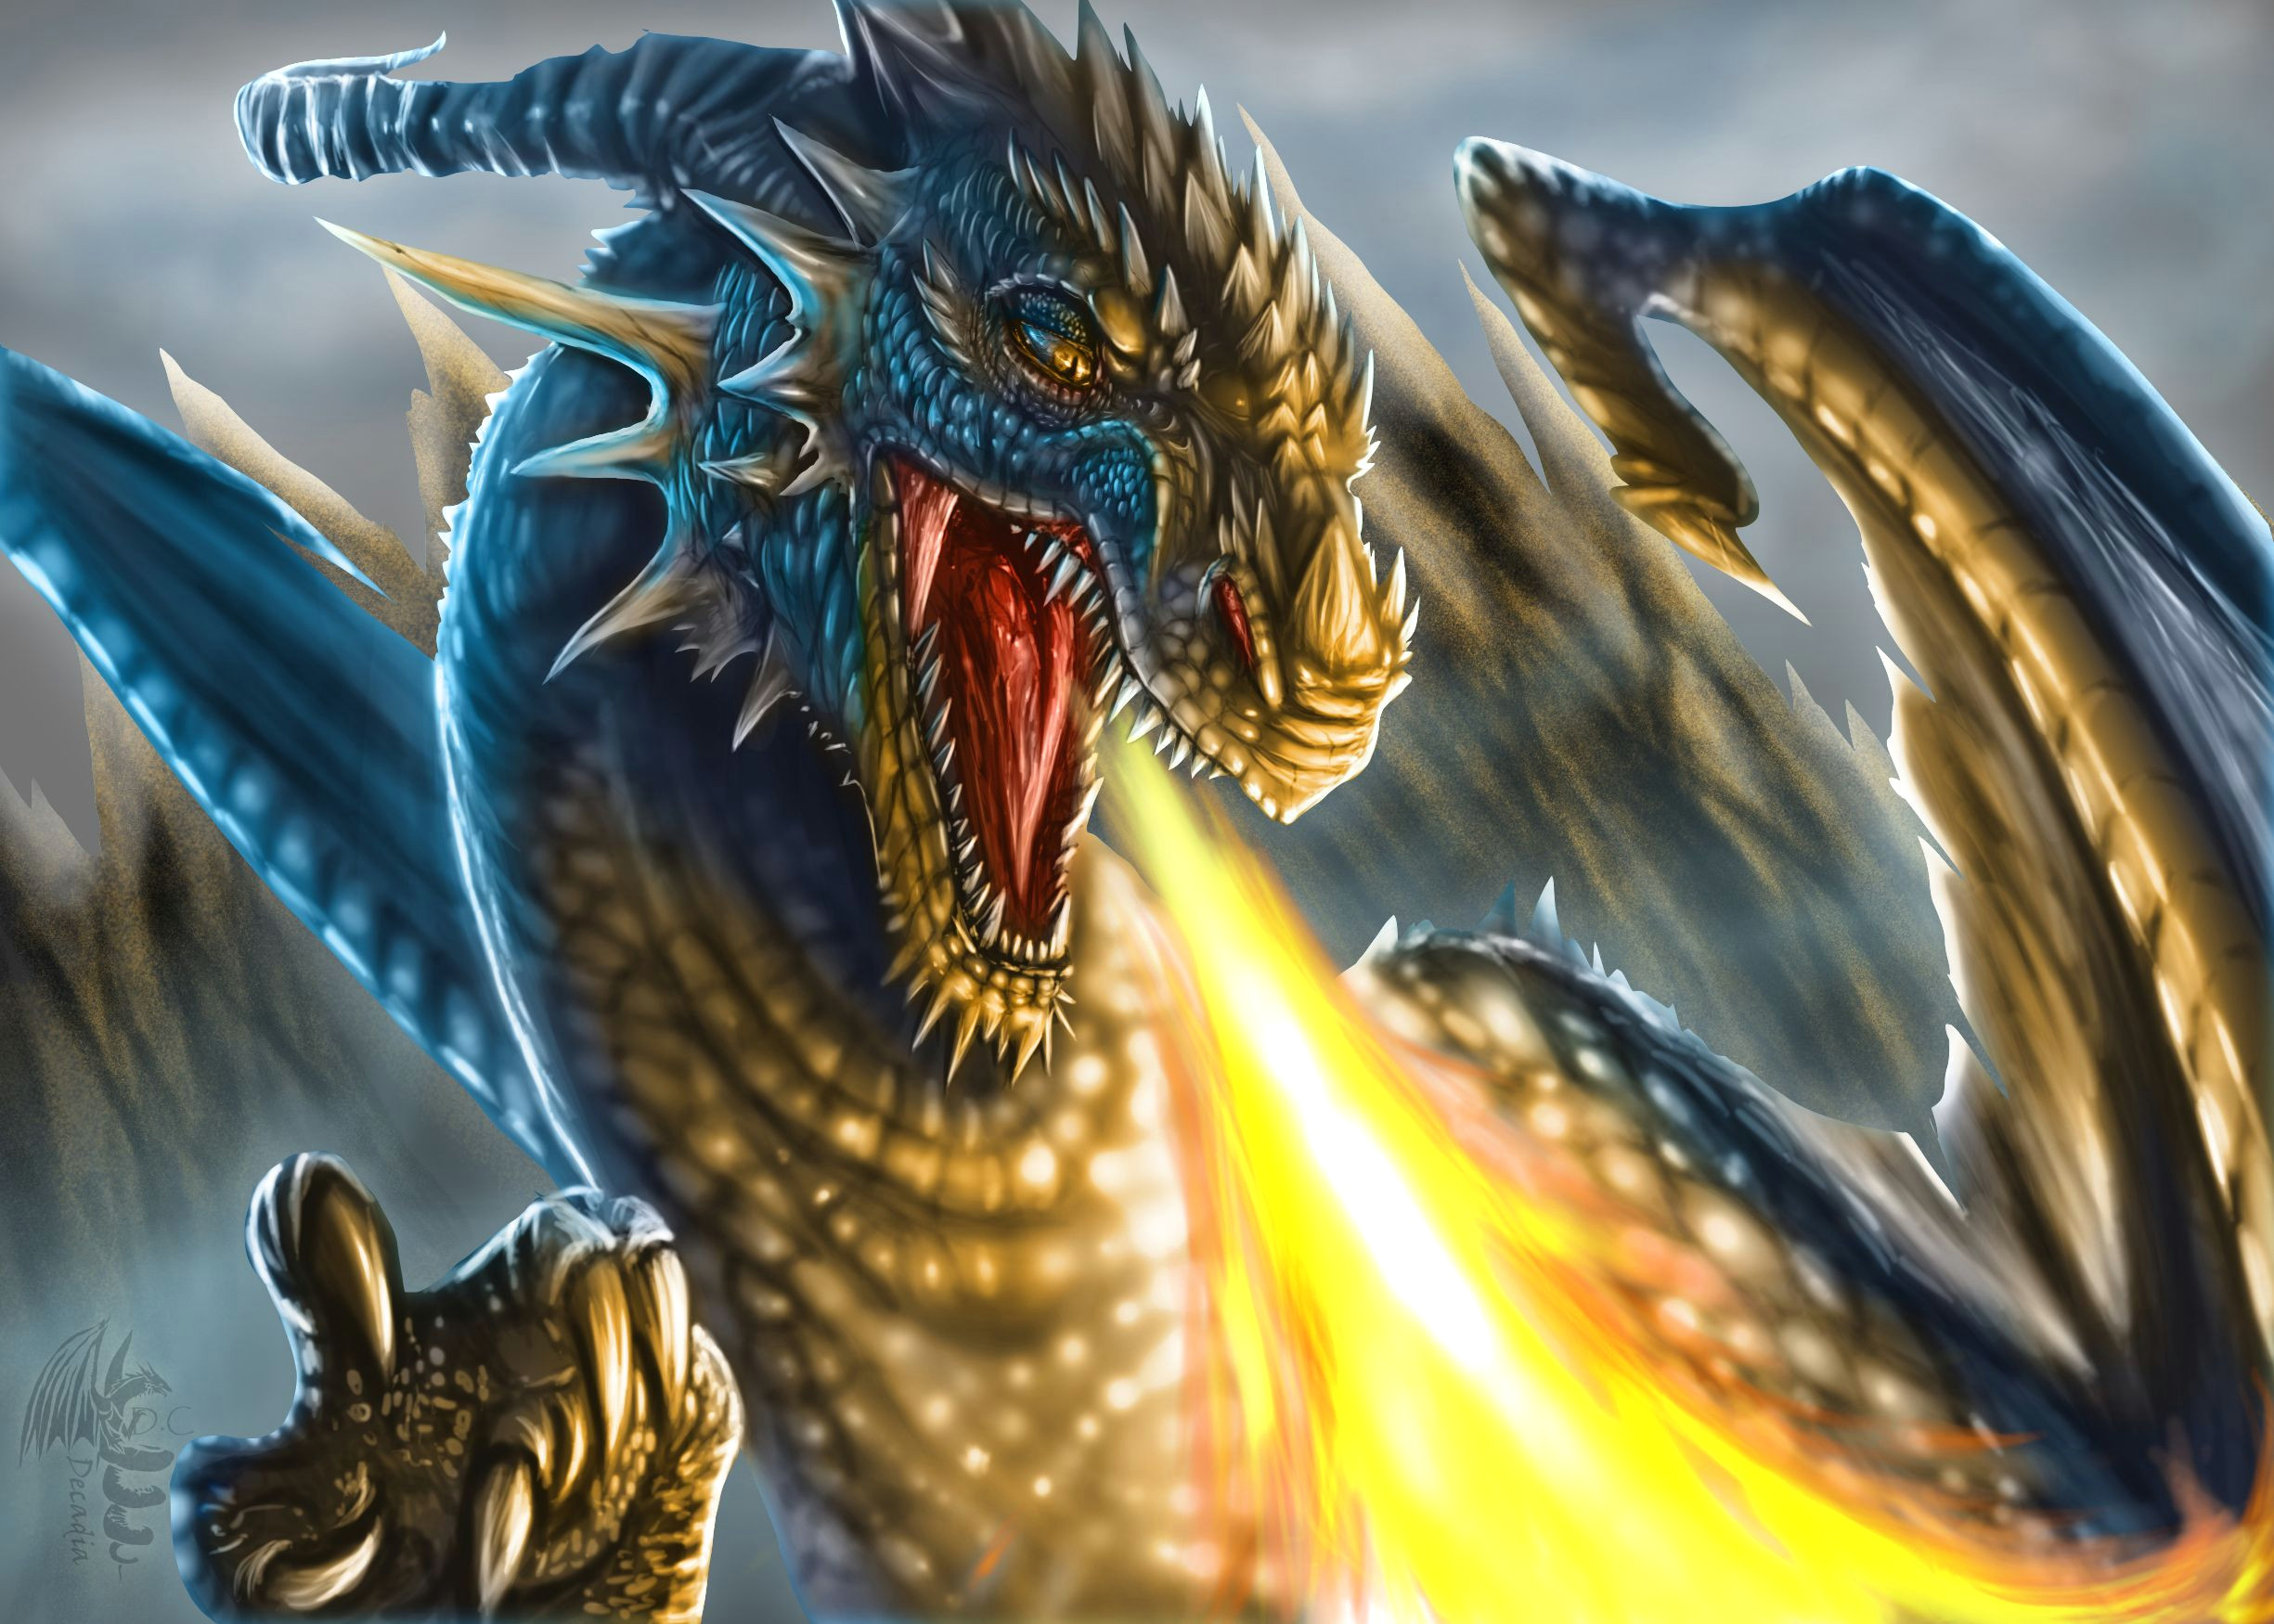 Drawings Of Dragons Blowing Fire Angry Fire Breath Dragon Wallpaper Download to Mobile Phone